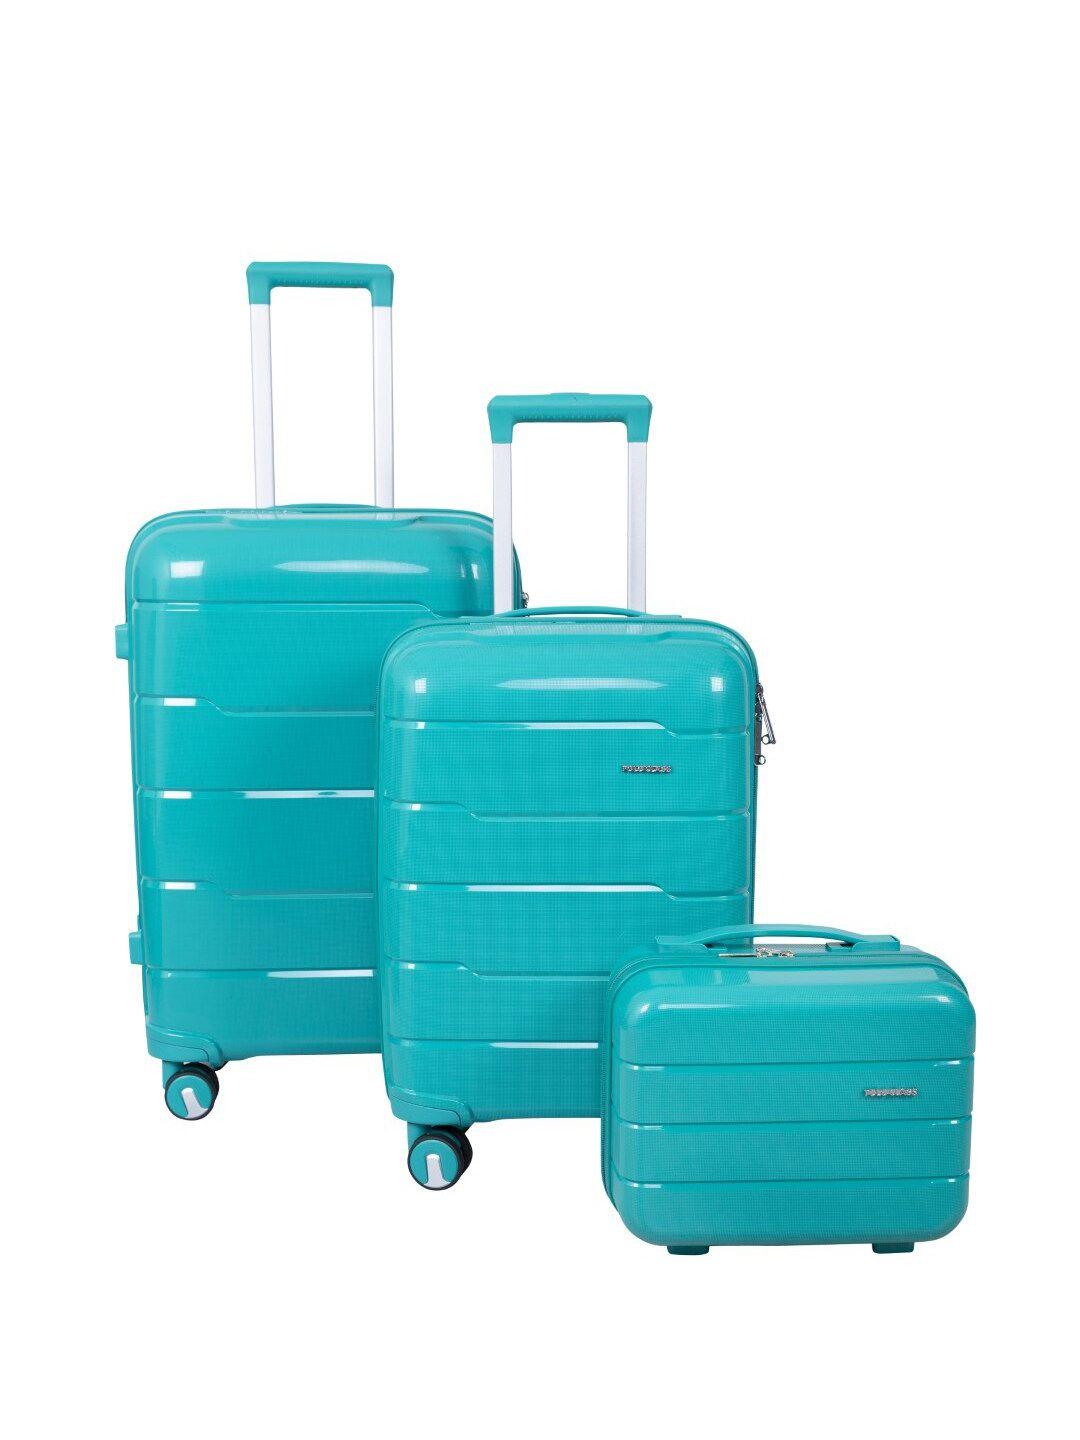 polo class set of 2 hard-sided trolley suitcases with 1 vanity bag